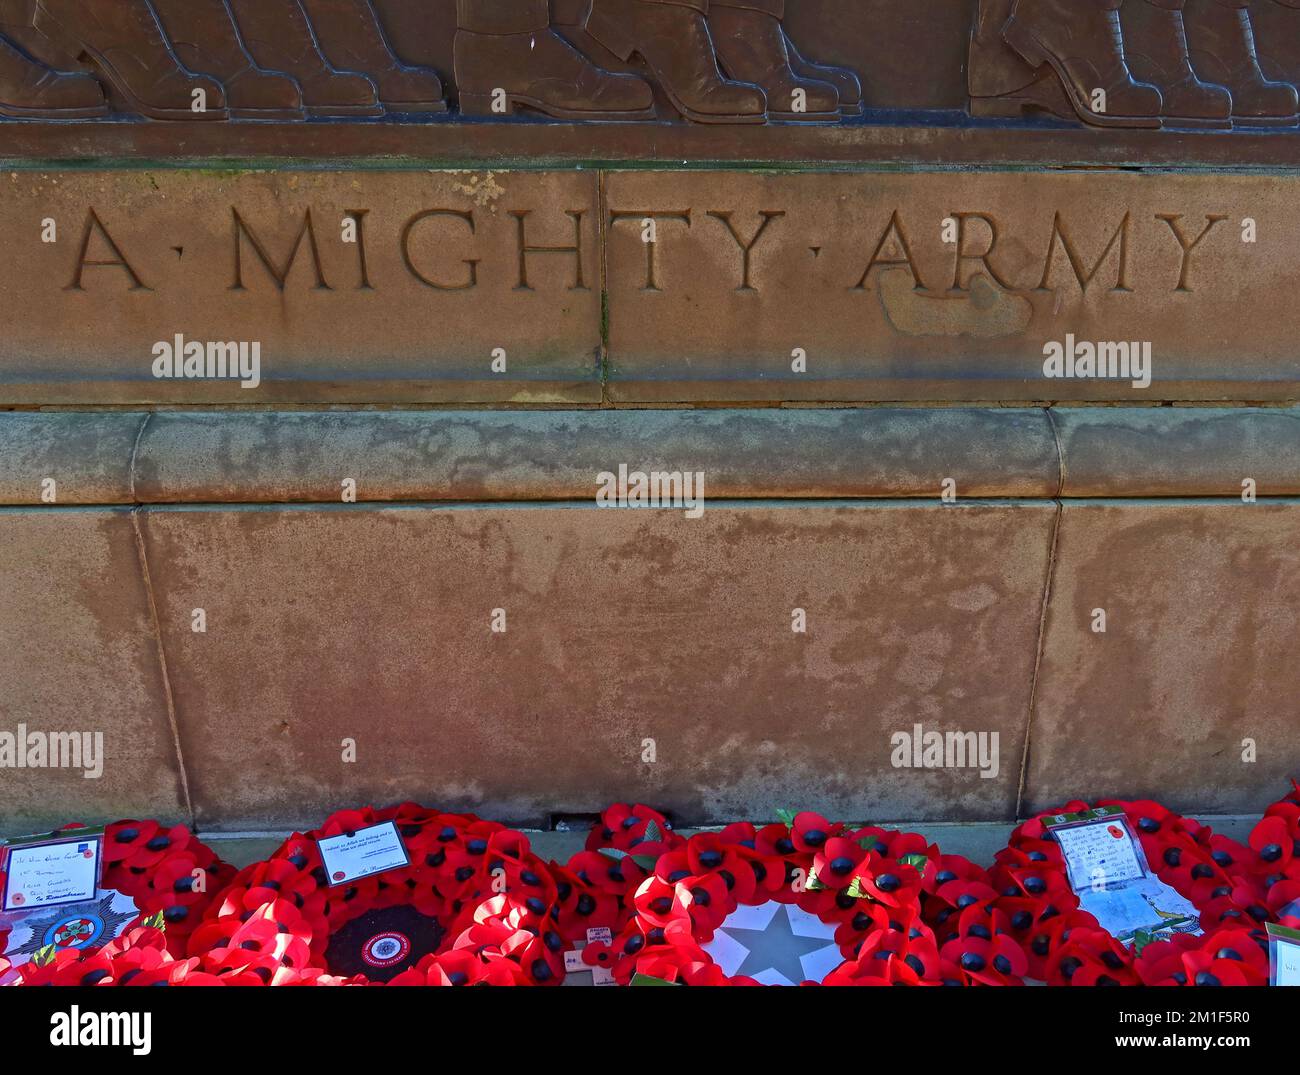 A mighty army -Liverpool St Georges military cenotaph, designed by Lionel Budden, Lime Street, Liverpool, England, UK, L1 1JJ Stock Photo